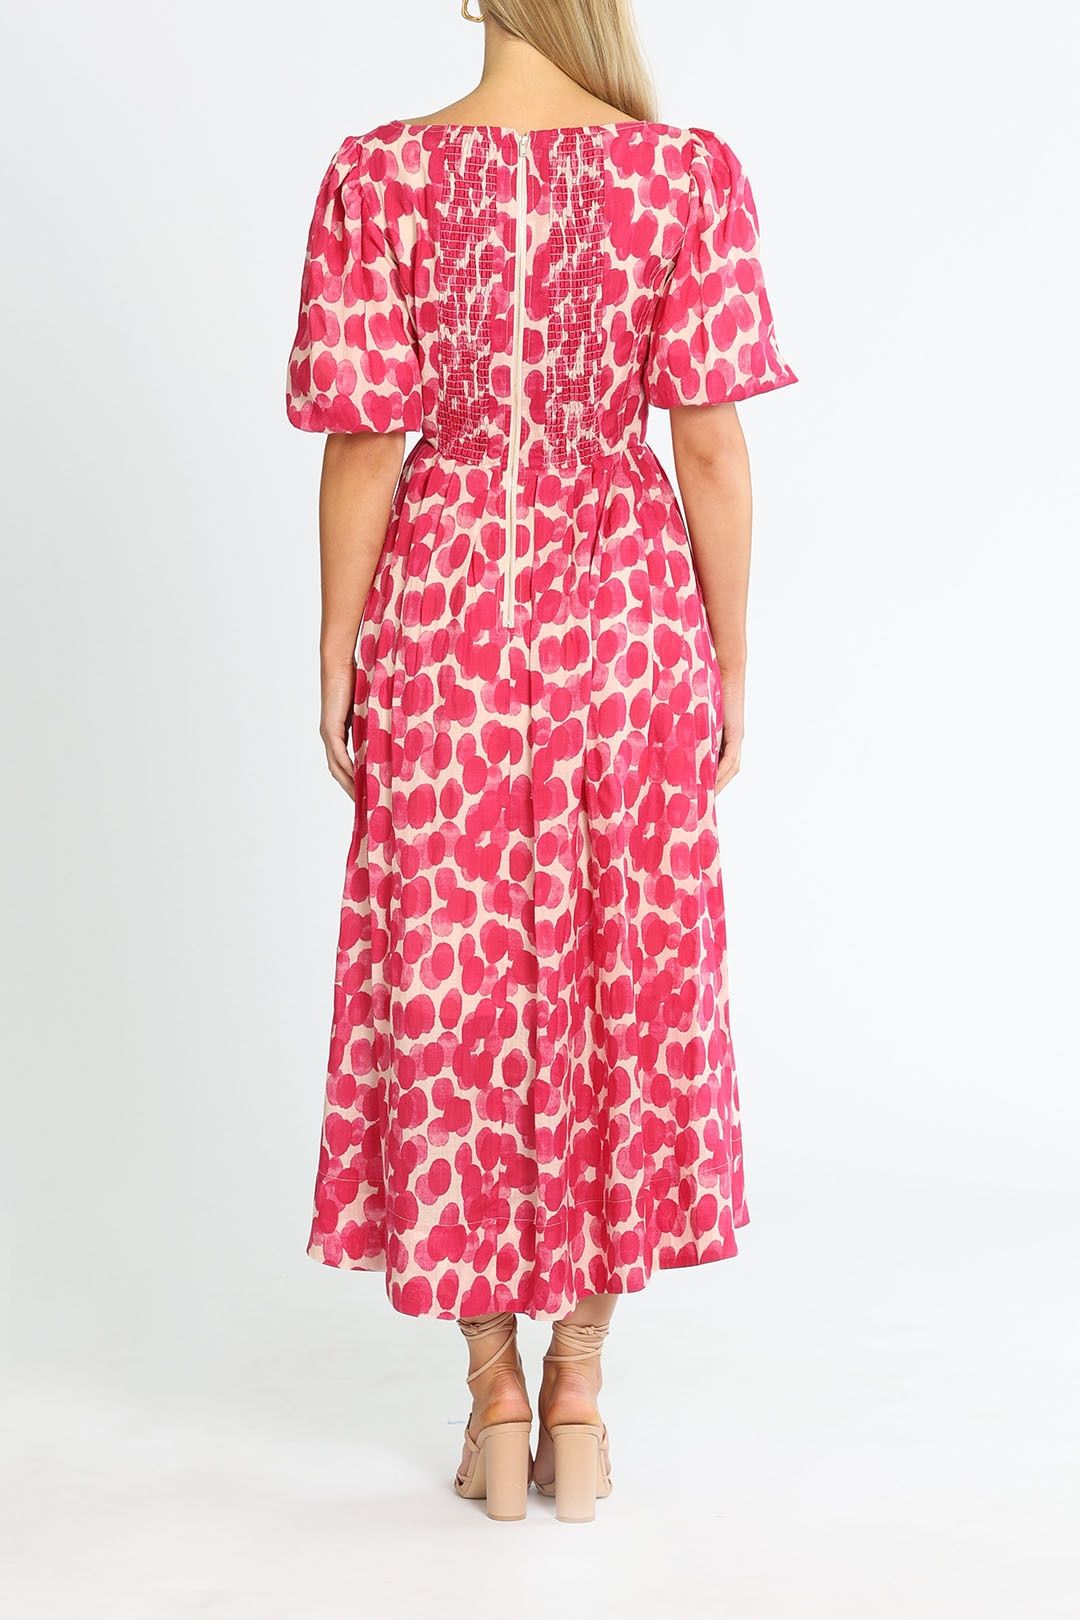 Ministry of Style Mottled Blossoms Midi Dress Pink